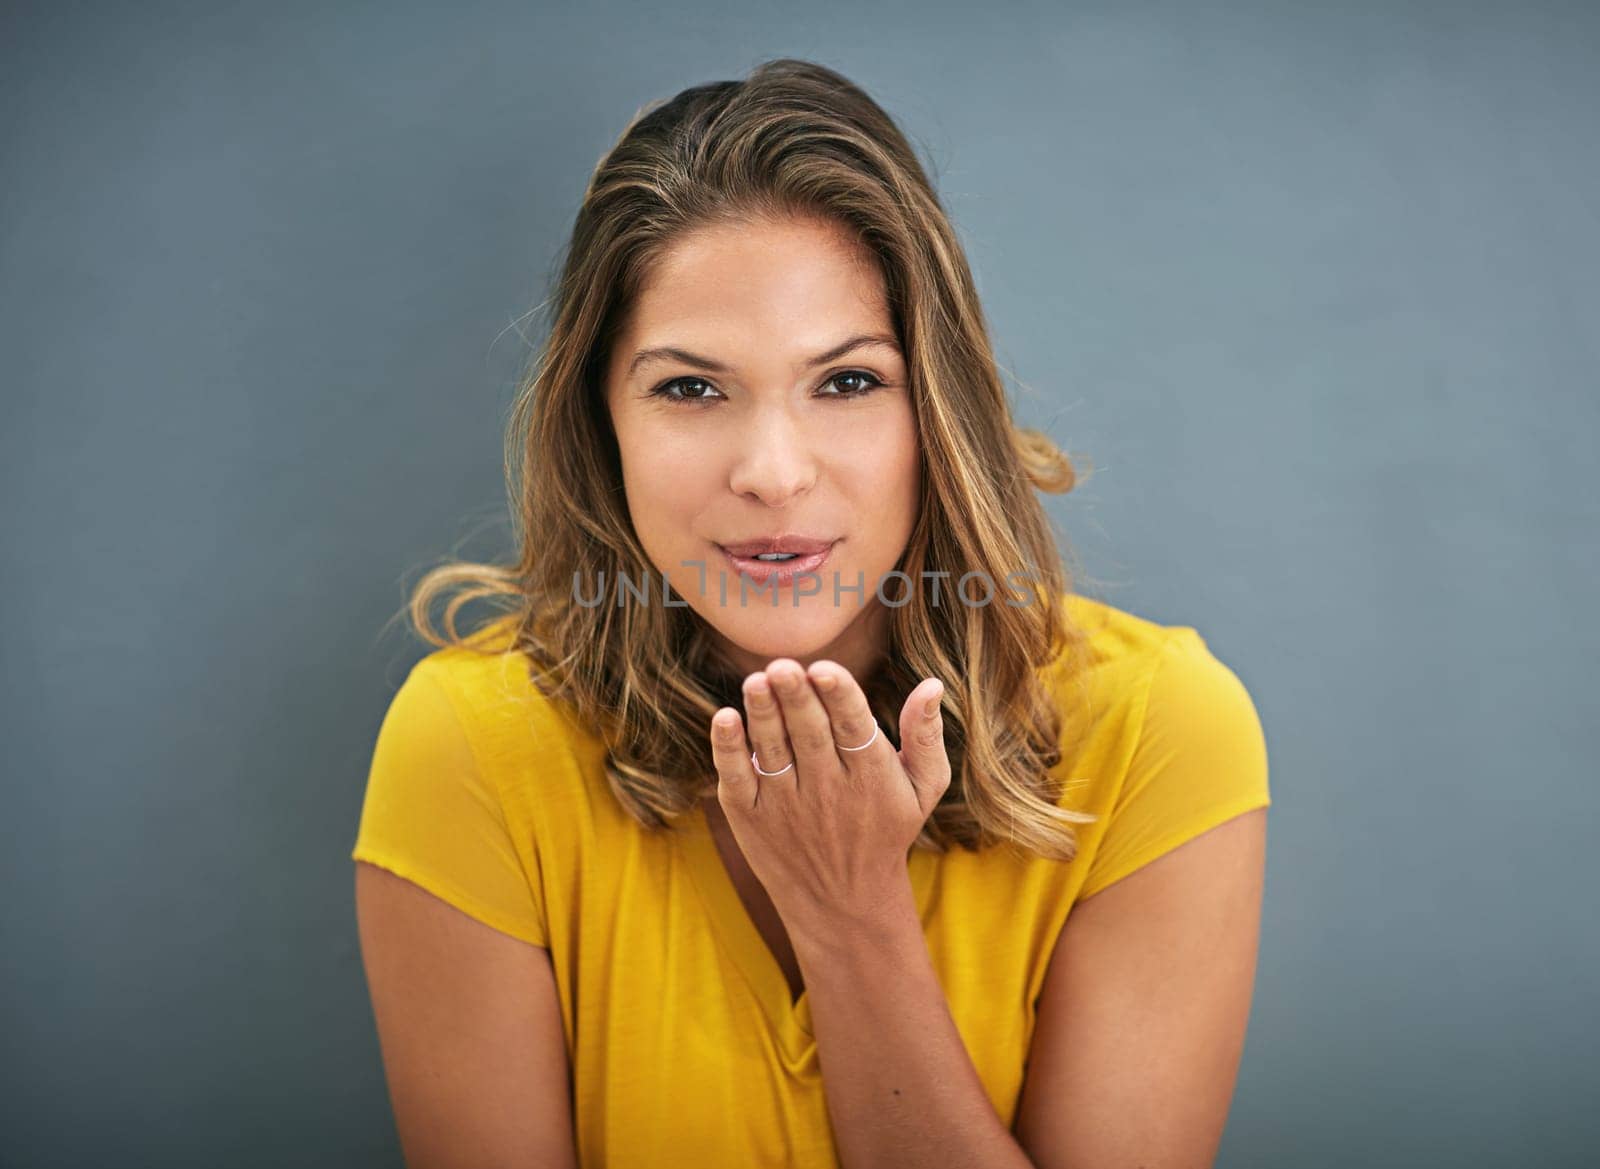 Woman, blowing a kiss and portrait with studio, love and smile for romance isolated on grey background. Model, hand and gesture for affection, flirt and emoji for valentines care and happiness.